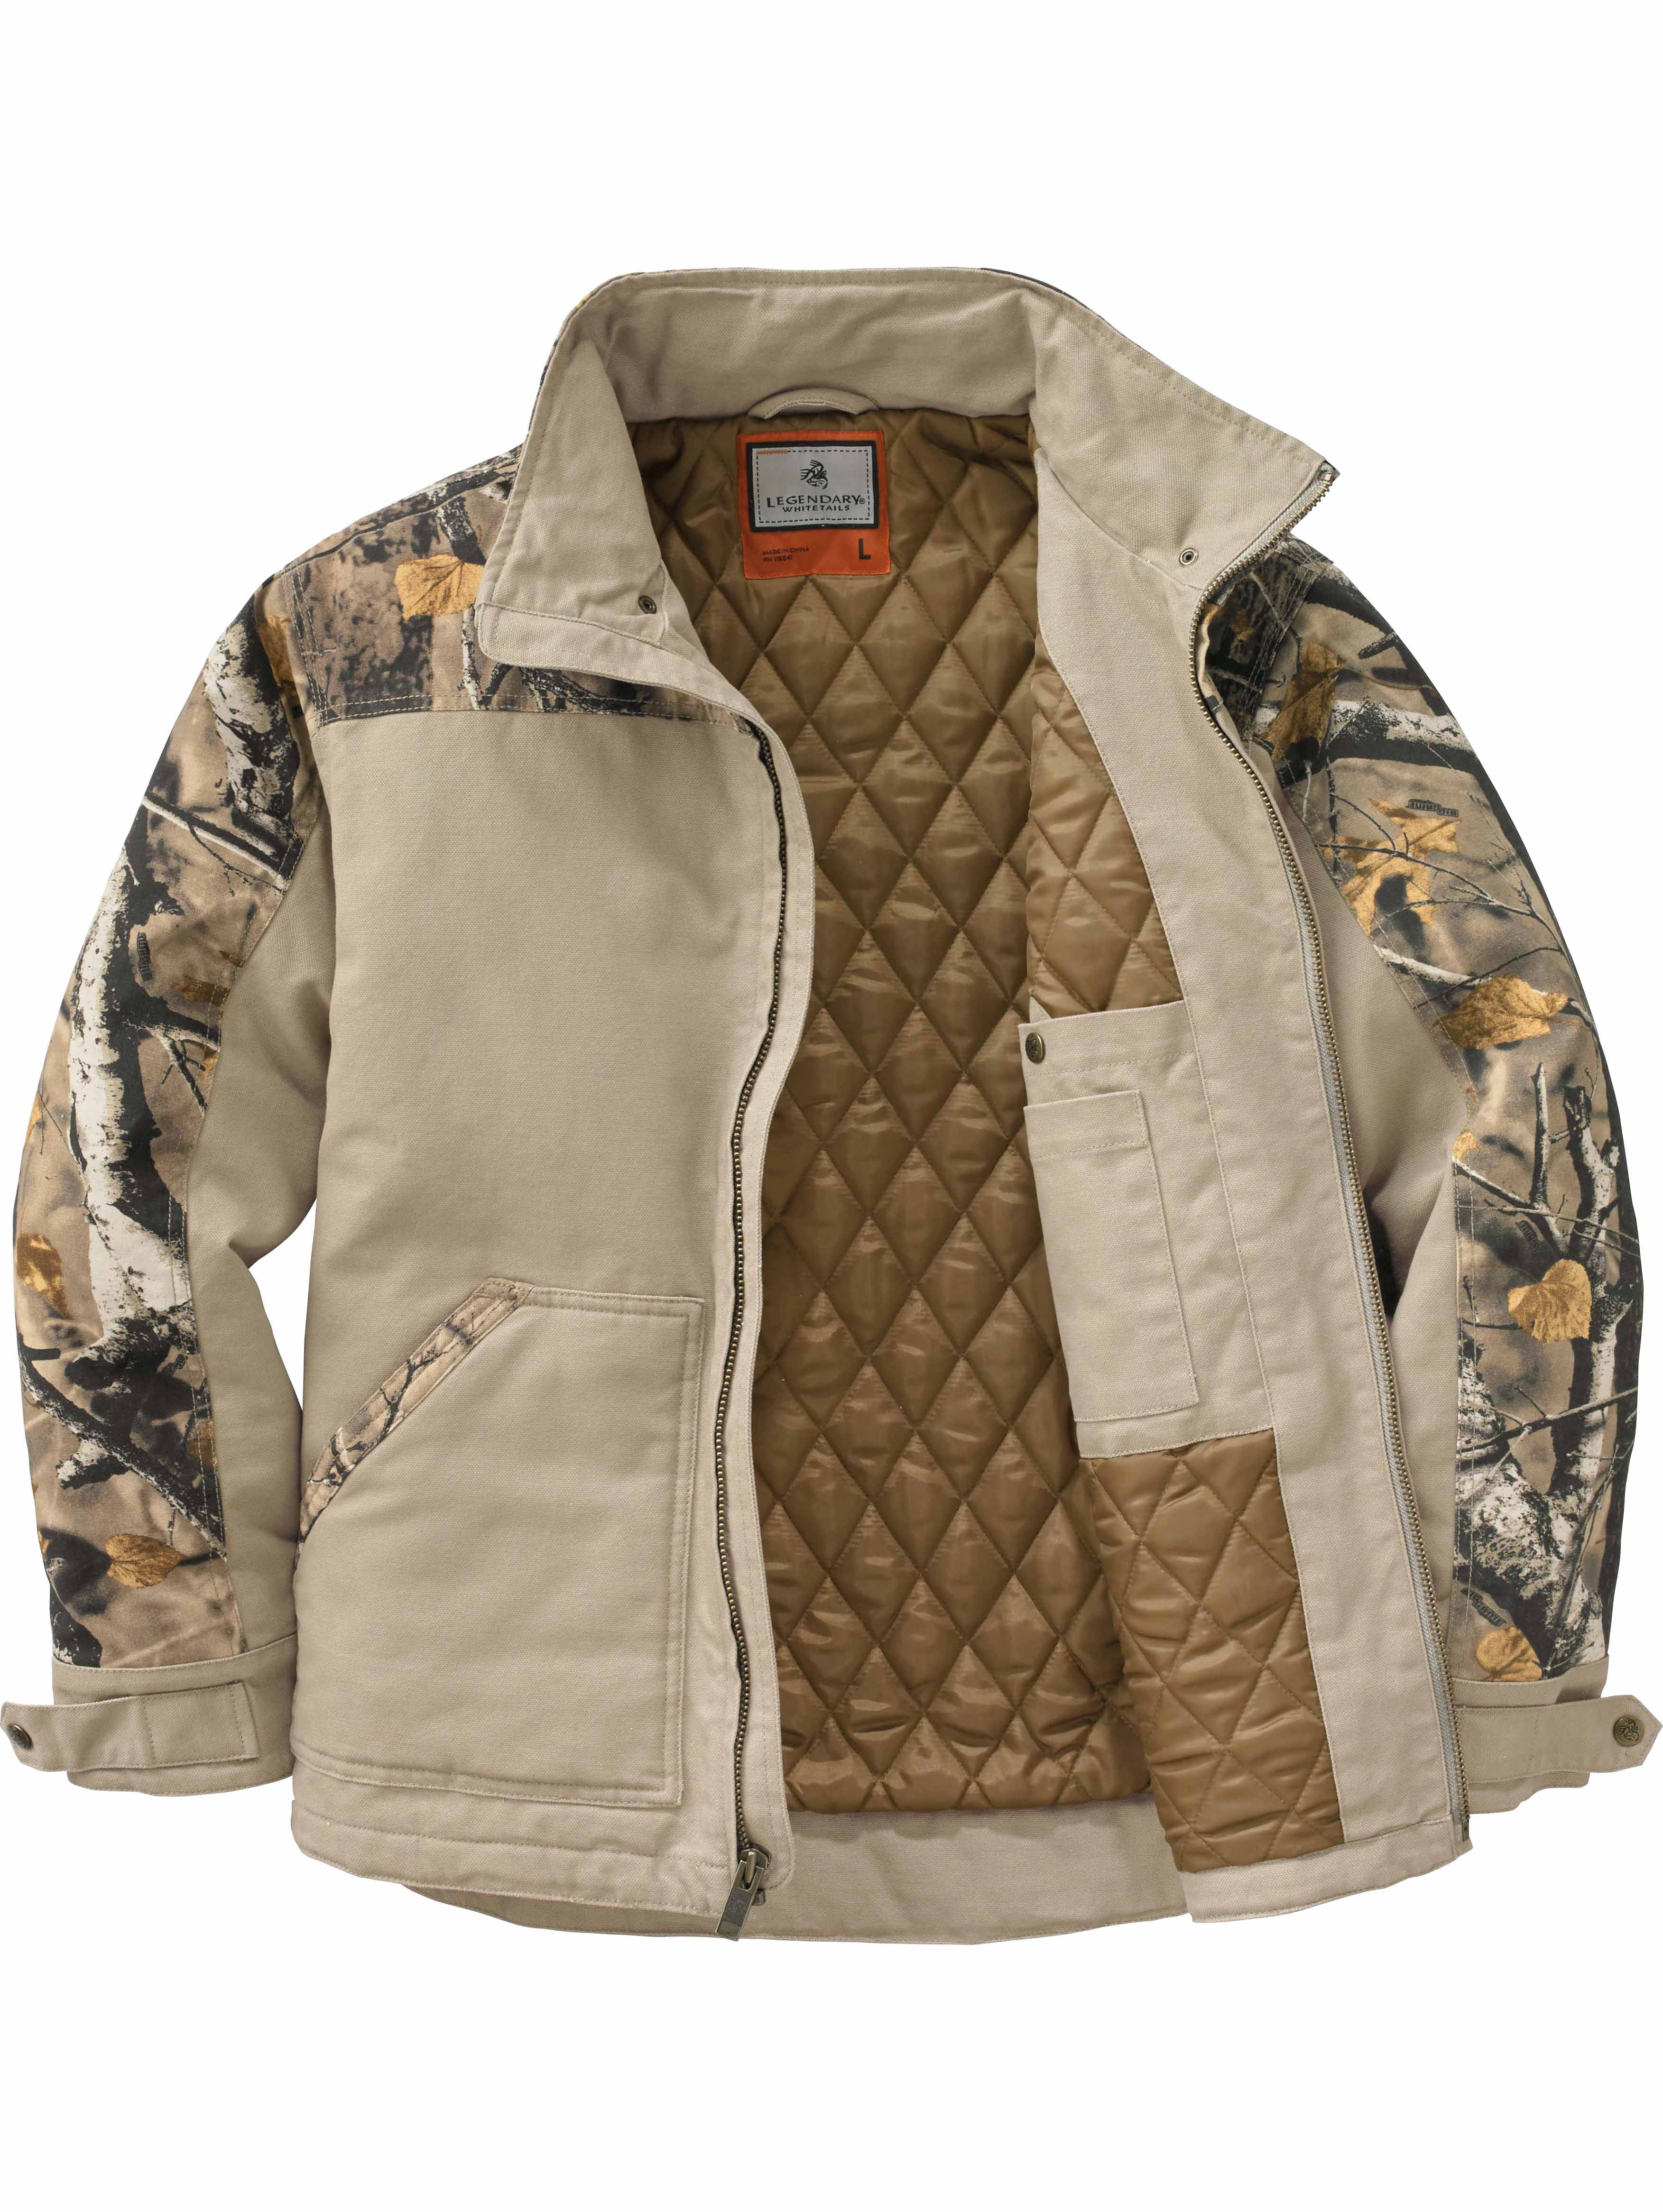 Legendary Whitetails Mens Canvas Cross Trail Big Game Camo Workwear Hooded Jacket